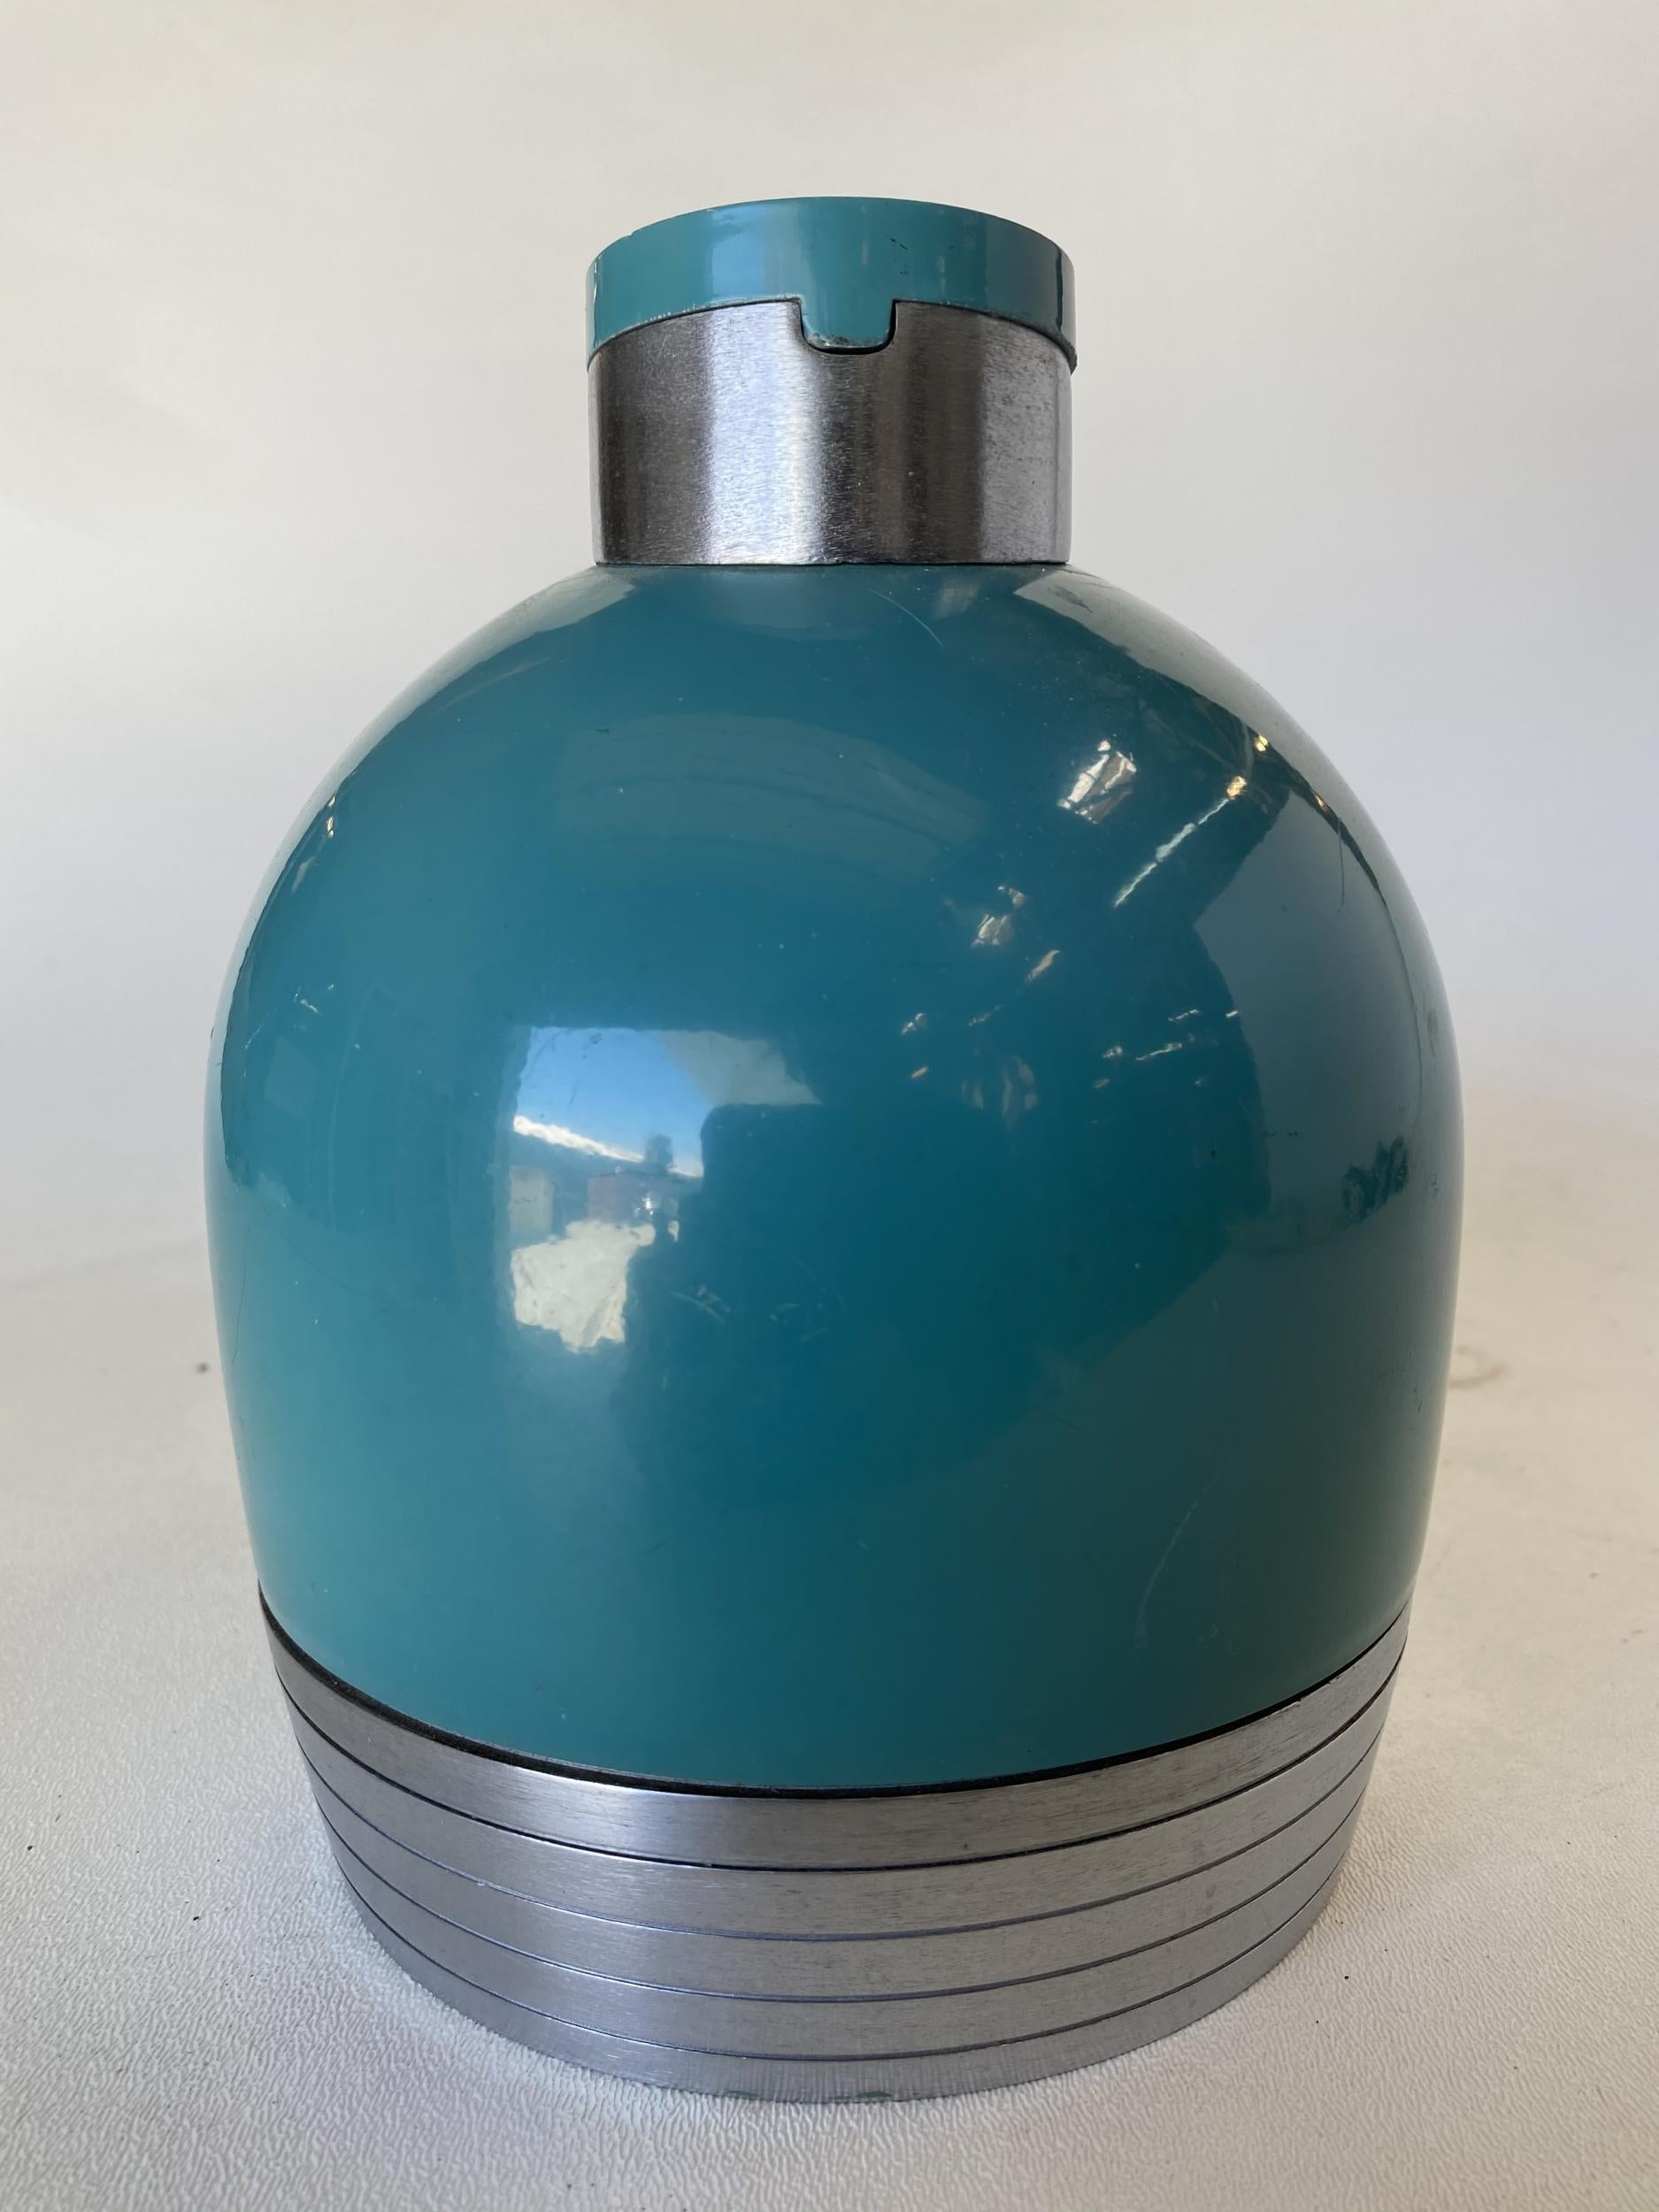 Mid-20th Century Art Deco Machined Aluminum Thermos No 539 by Henry Dreyfuss with Tray